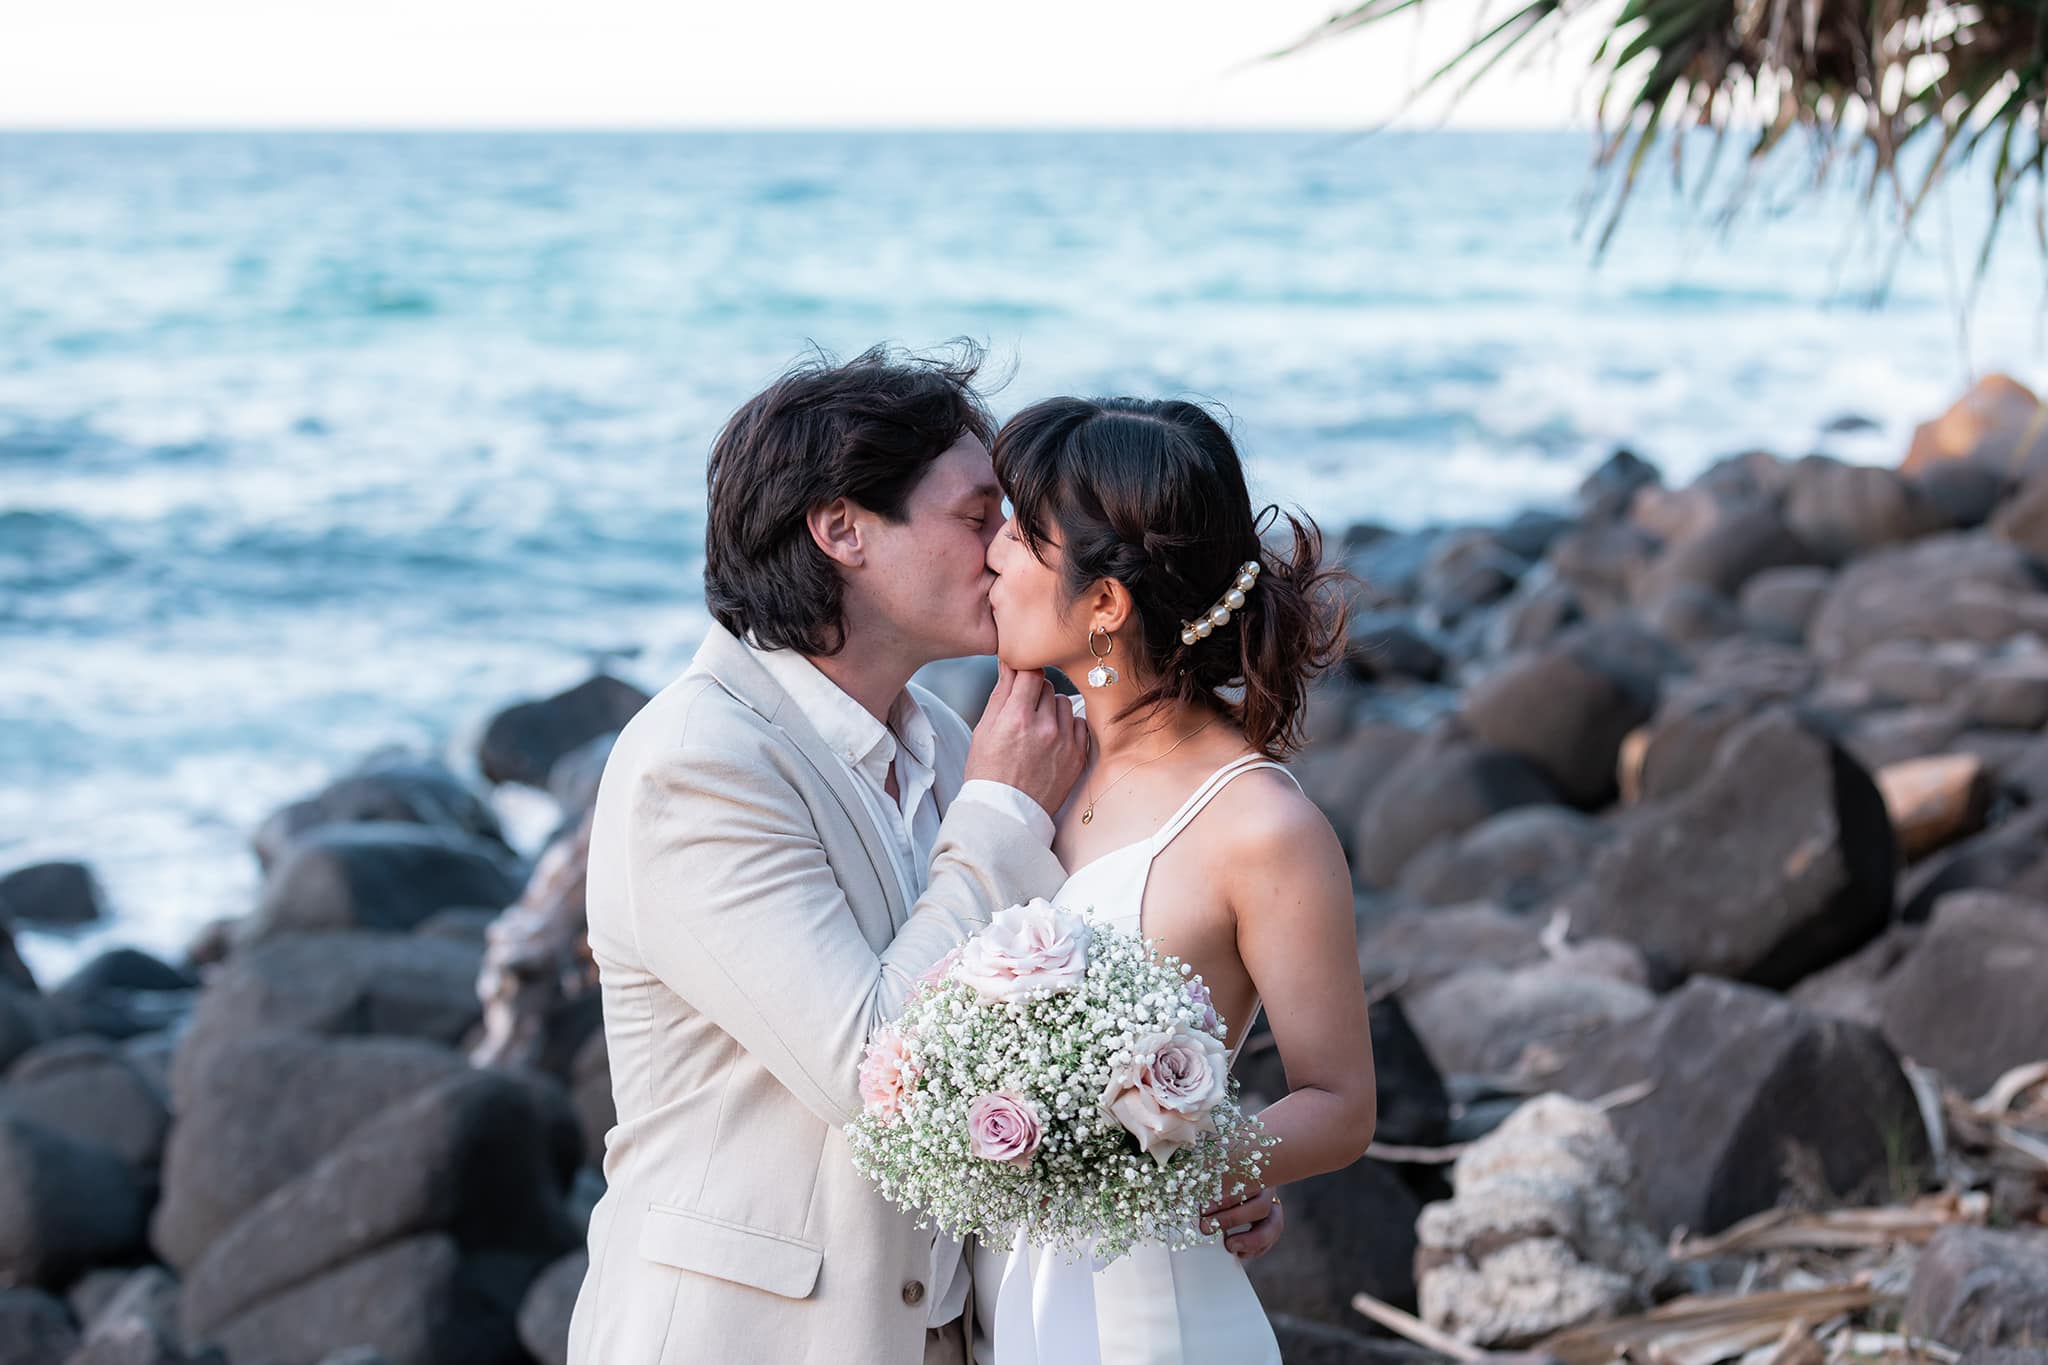 Bride and groom celebrating their wedding at Burleigh Heads on the Gold Coast.